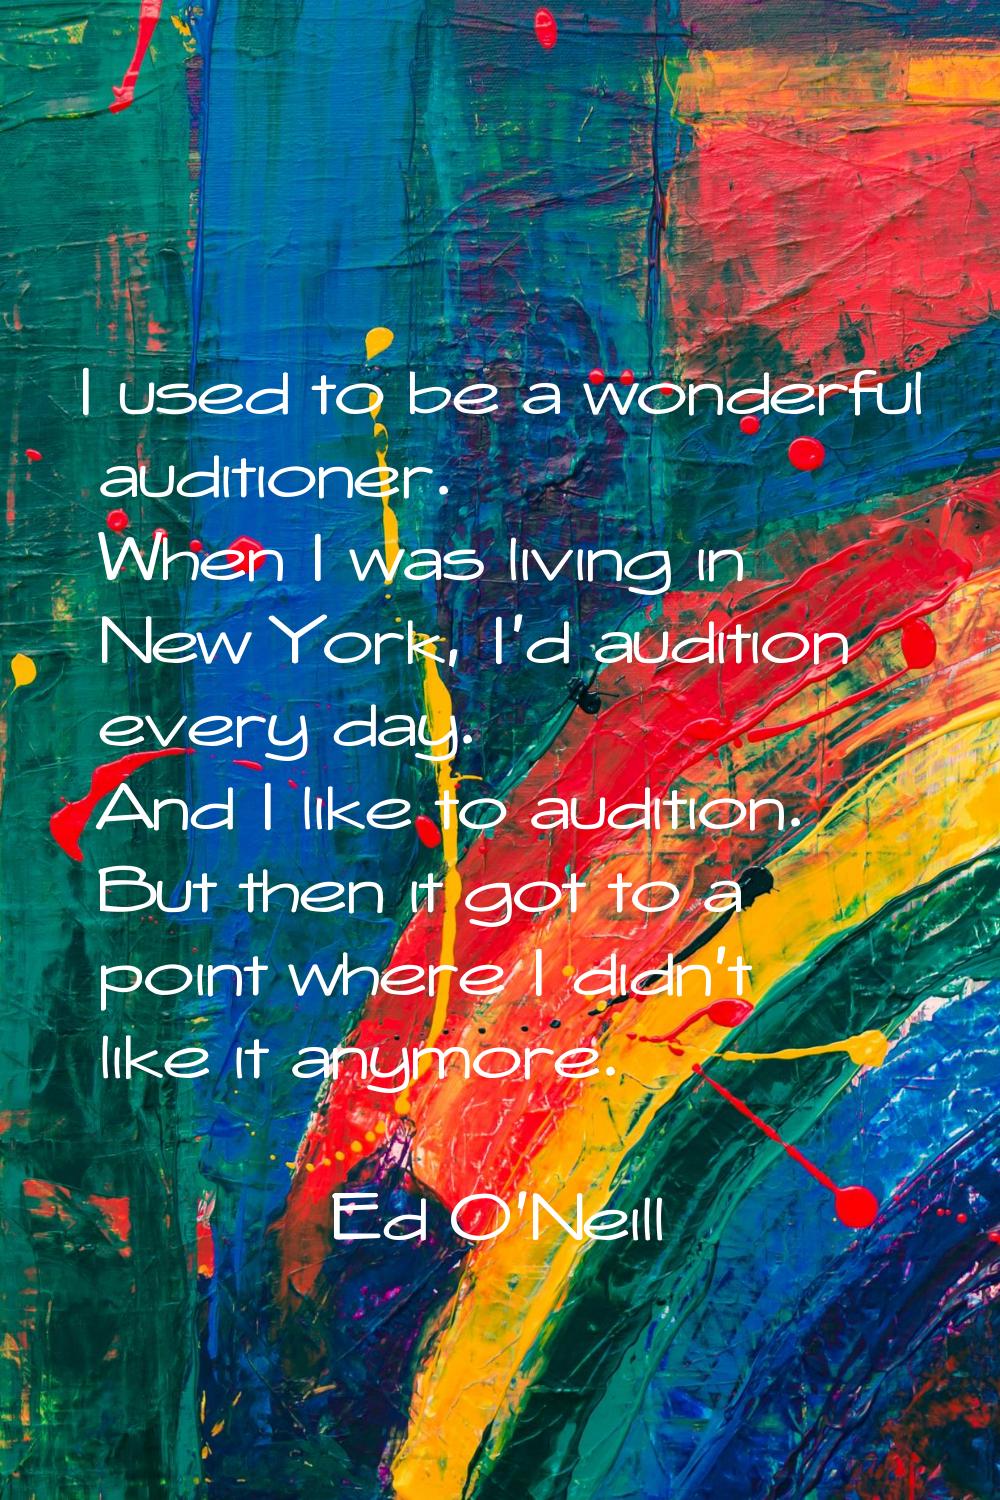 I used to be a wonderful auditioner. When I was living in New York, I'd audition every day. And I l